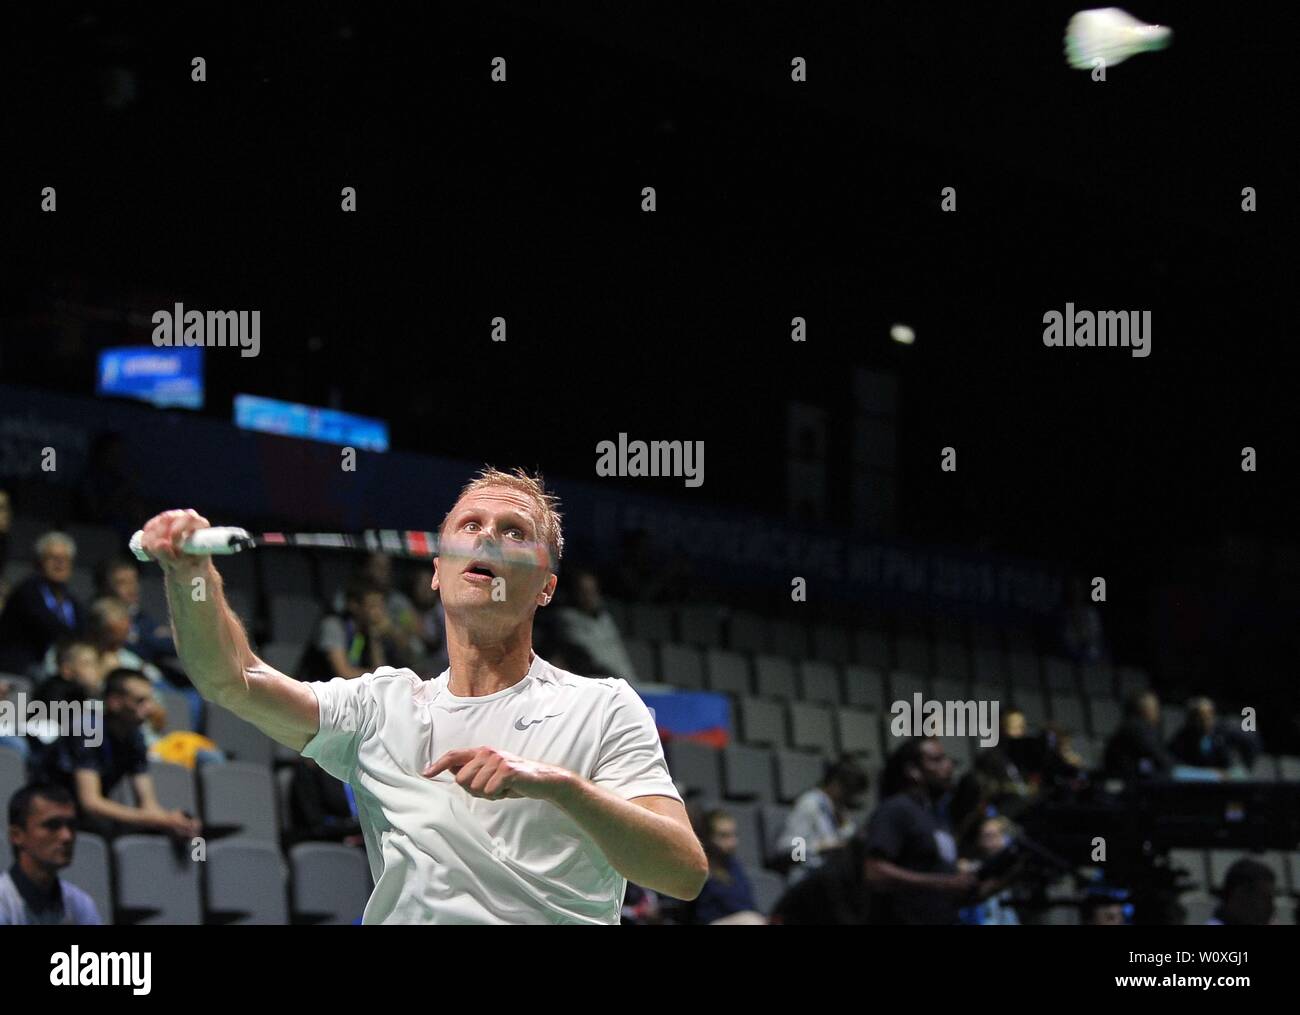 Minsk, Belarus. 28th June, 2019. Raul Must (EST) taking part in the Badminton tournament at the 2nd European games. Credit Garry Bowden/SIP photo agency/Alamy live news. Stock Photo